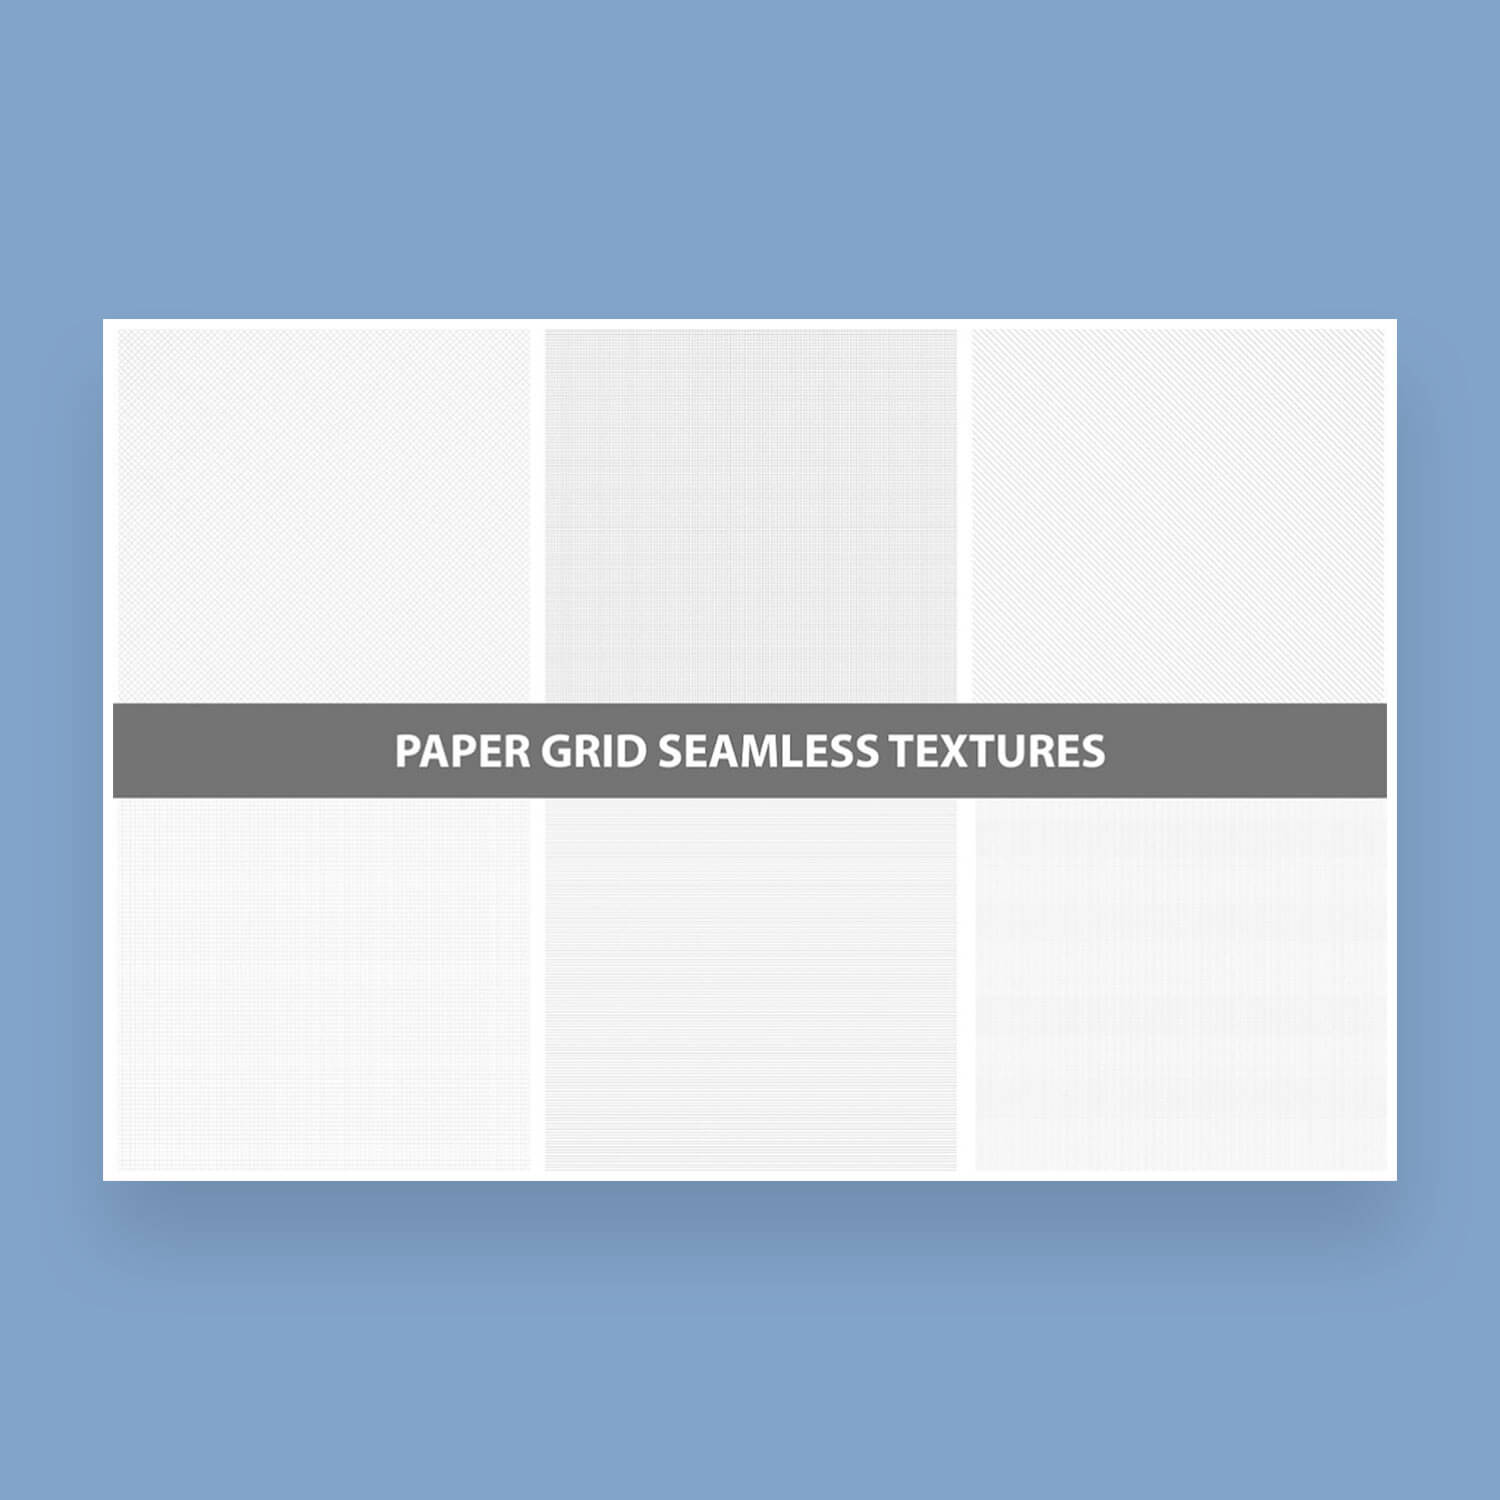 A selection of six patterns of pale gray seamless mesh patterns.